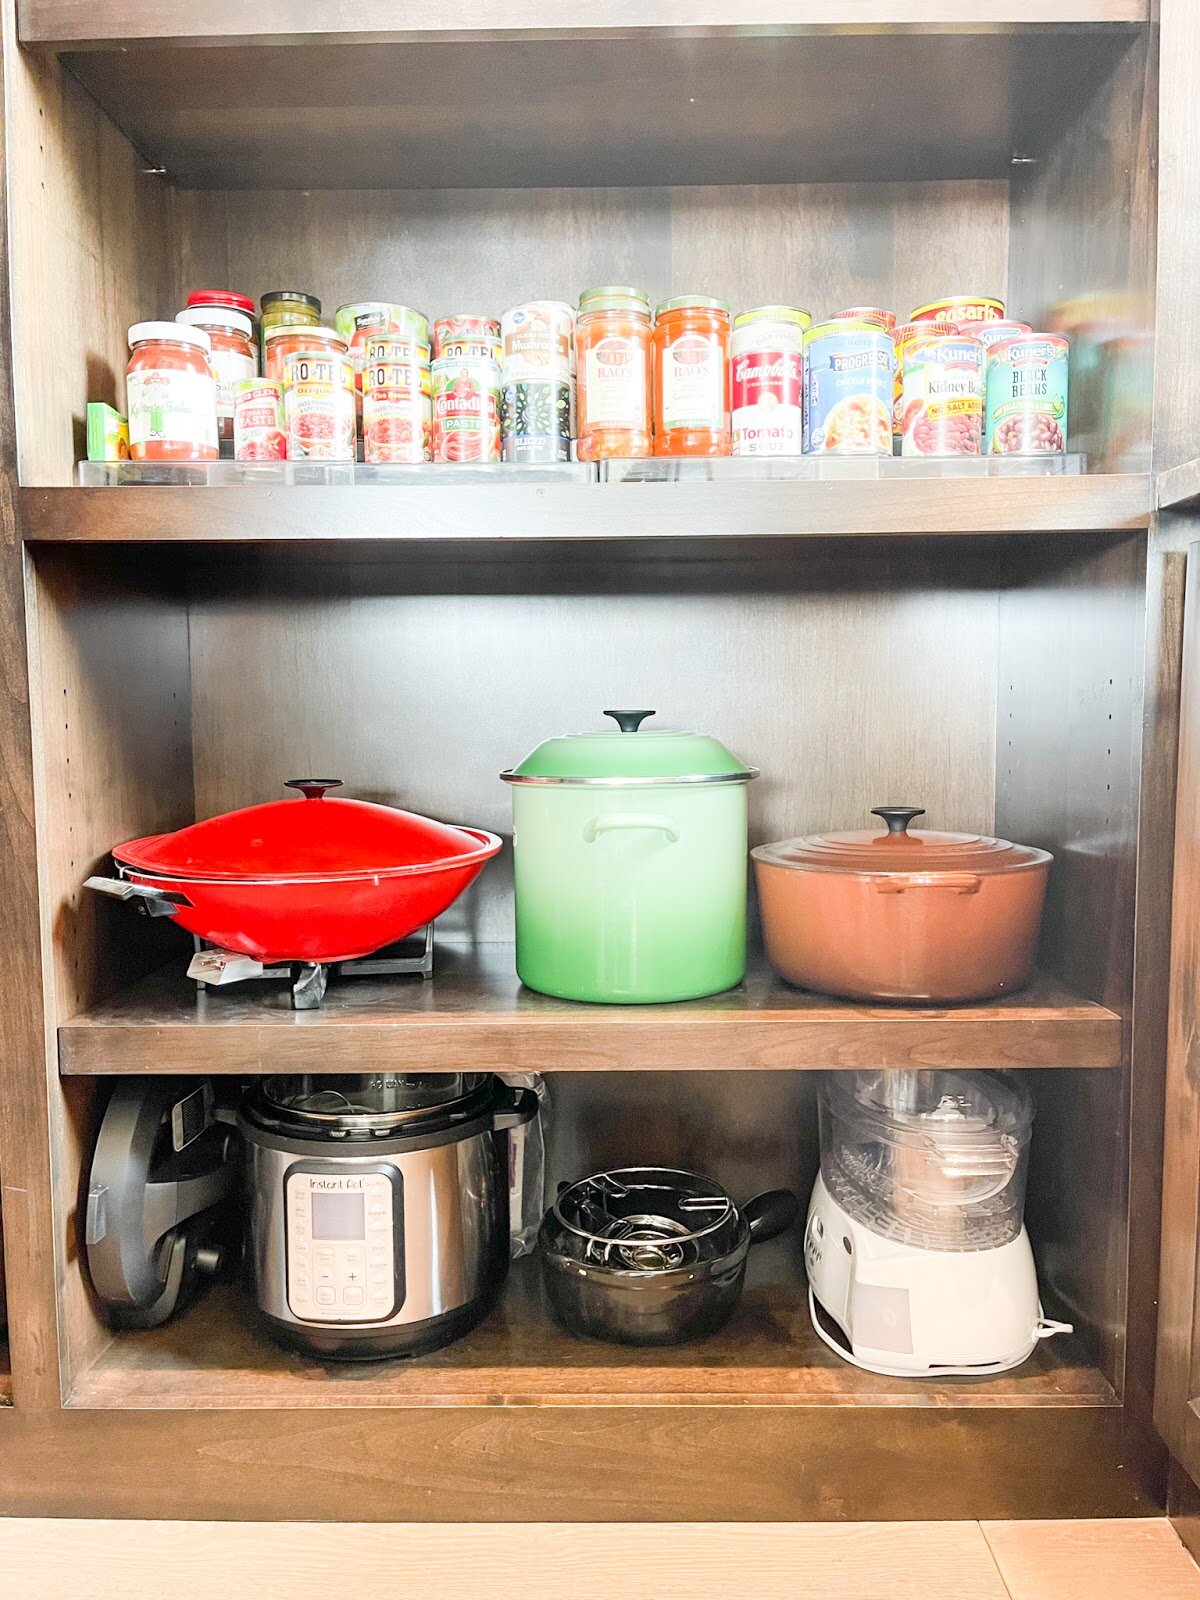 pantry pots and pans.jpg